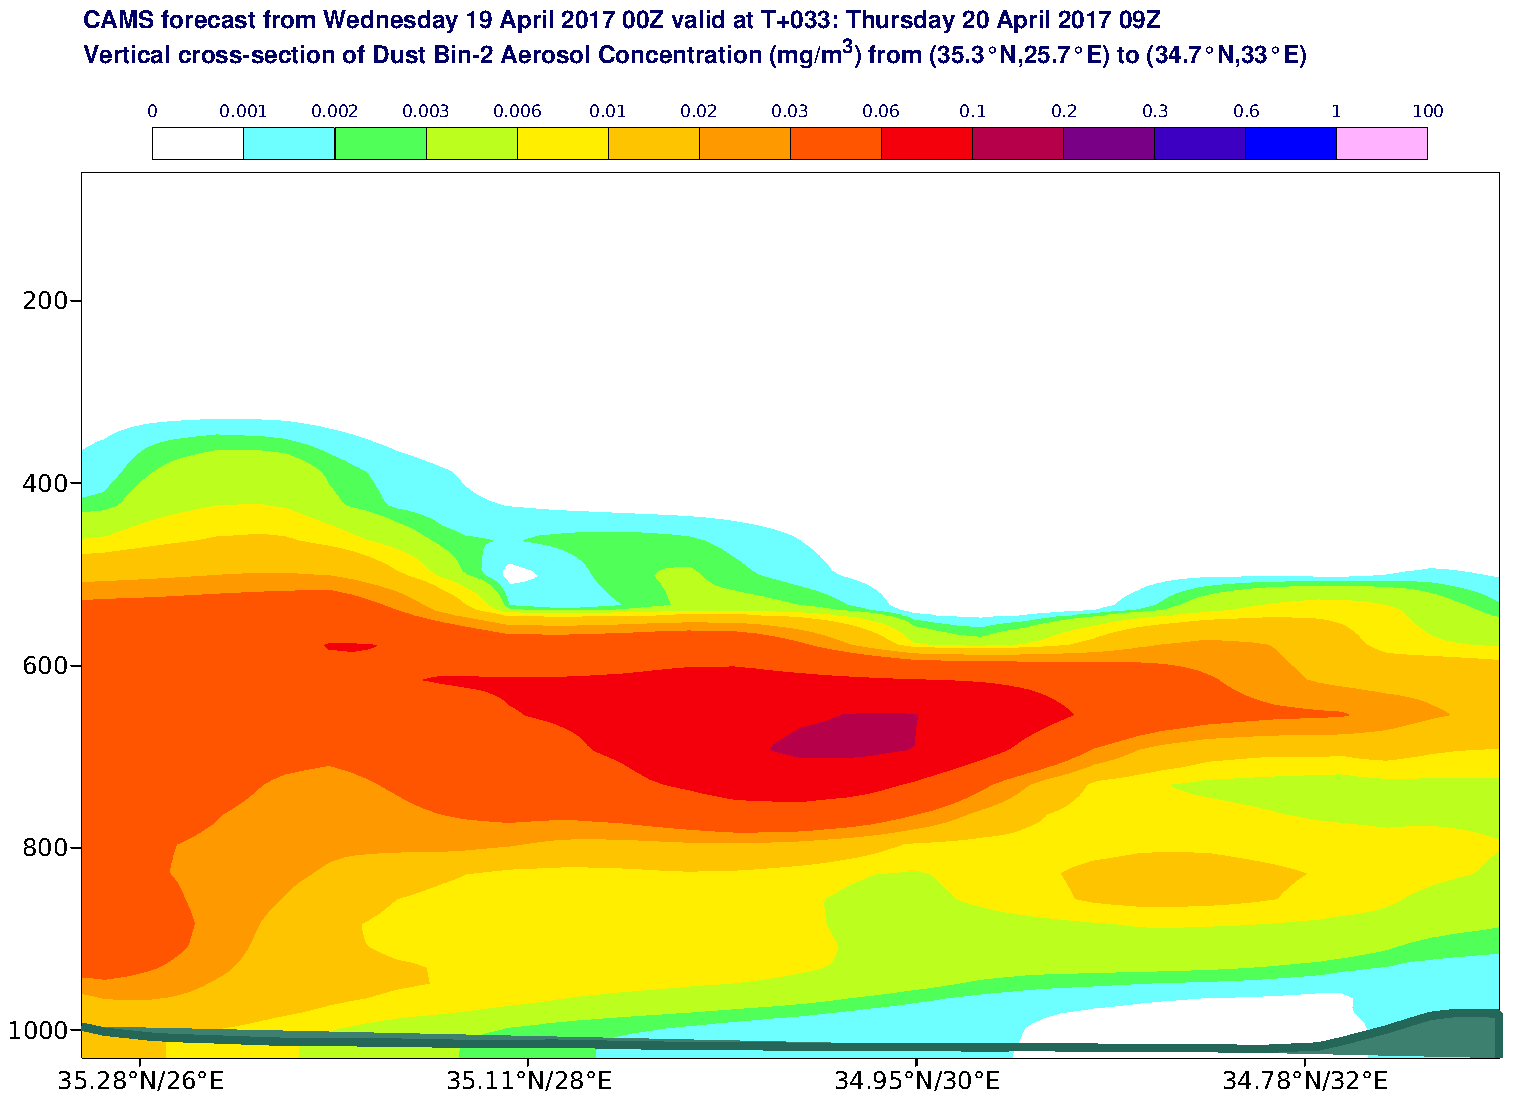 Vertical cross-section of Dust Bin-2 Aerosol Concentration (mg/m3) valid at T33 - 2017-04-20 09:00